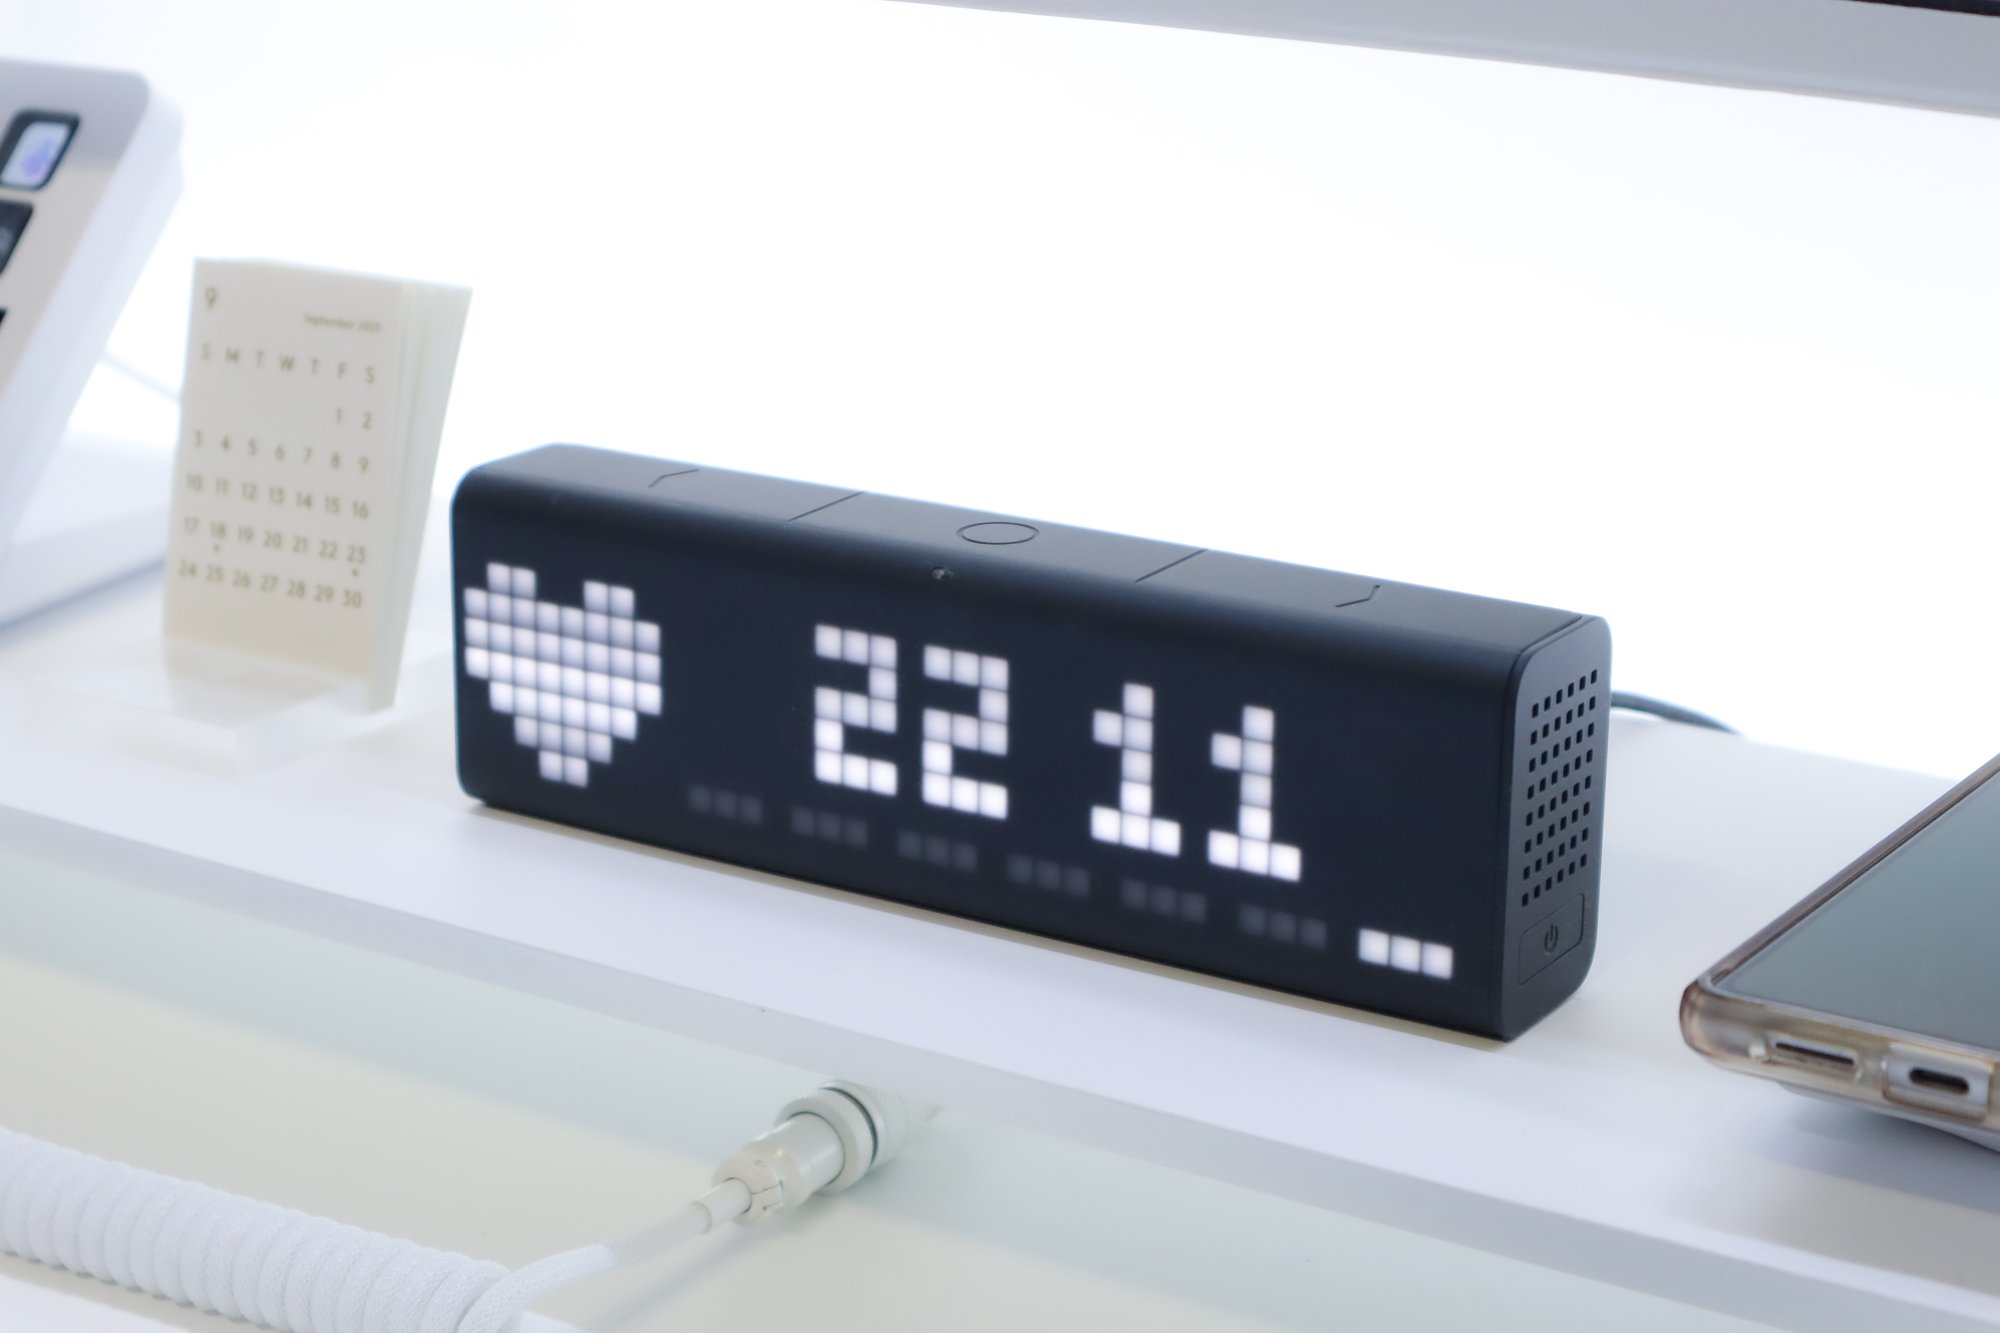 A modern LaMetric Time digital clock displaying the time in large white LED numerals, with a minimalistic design